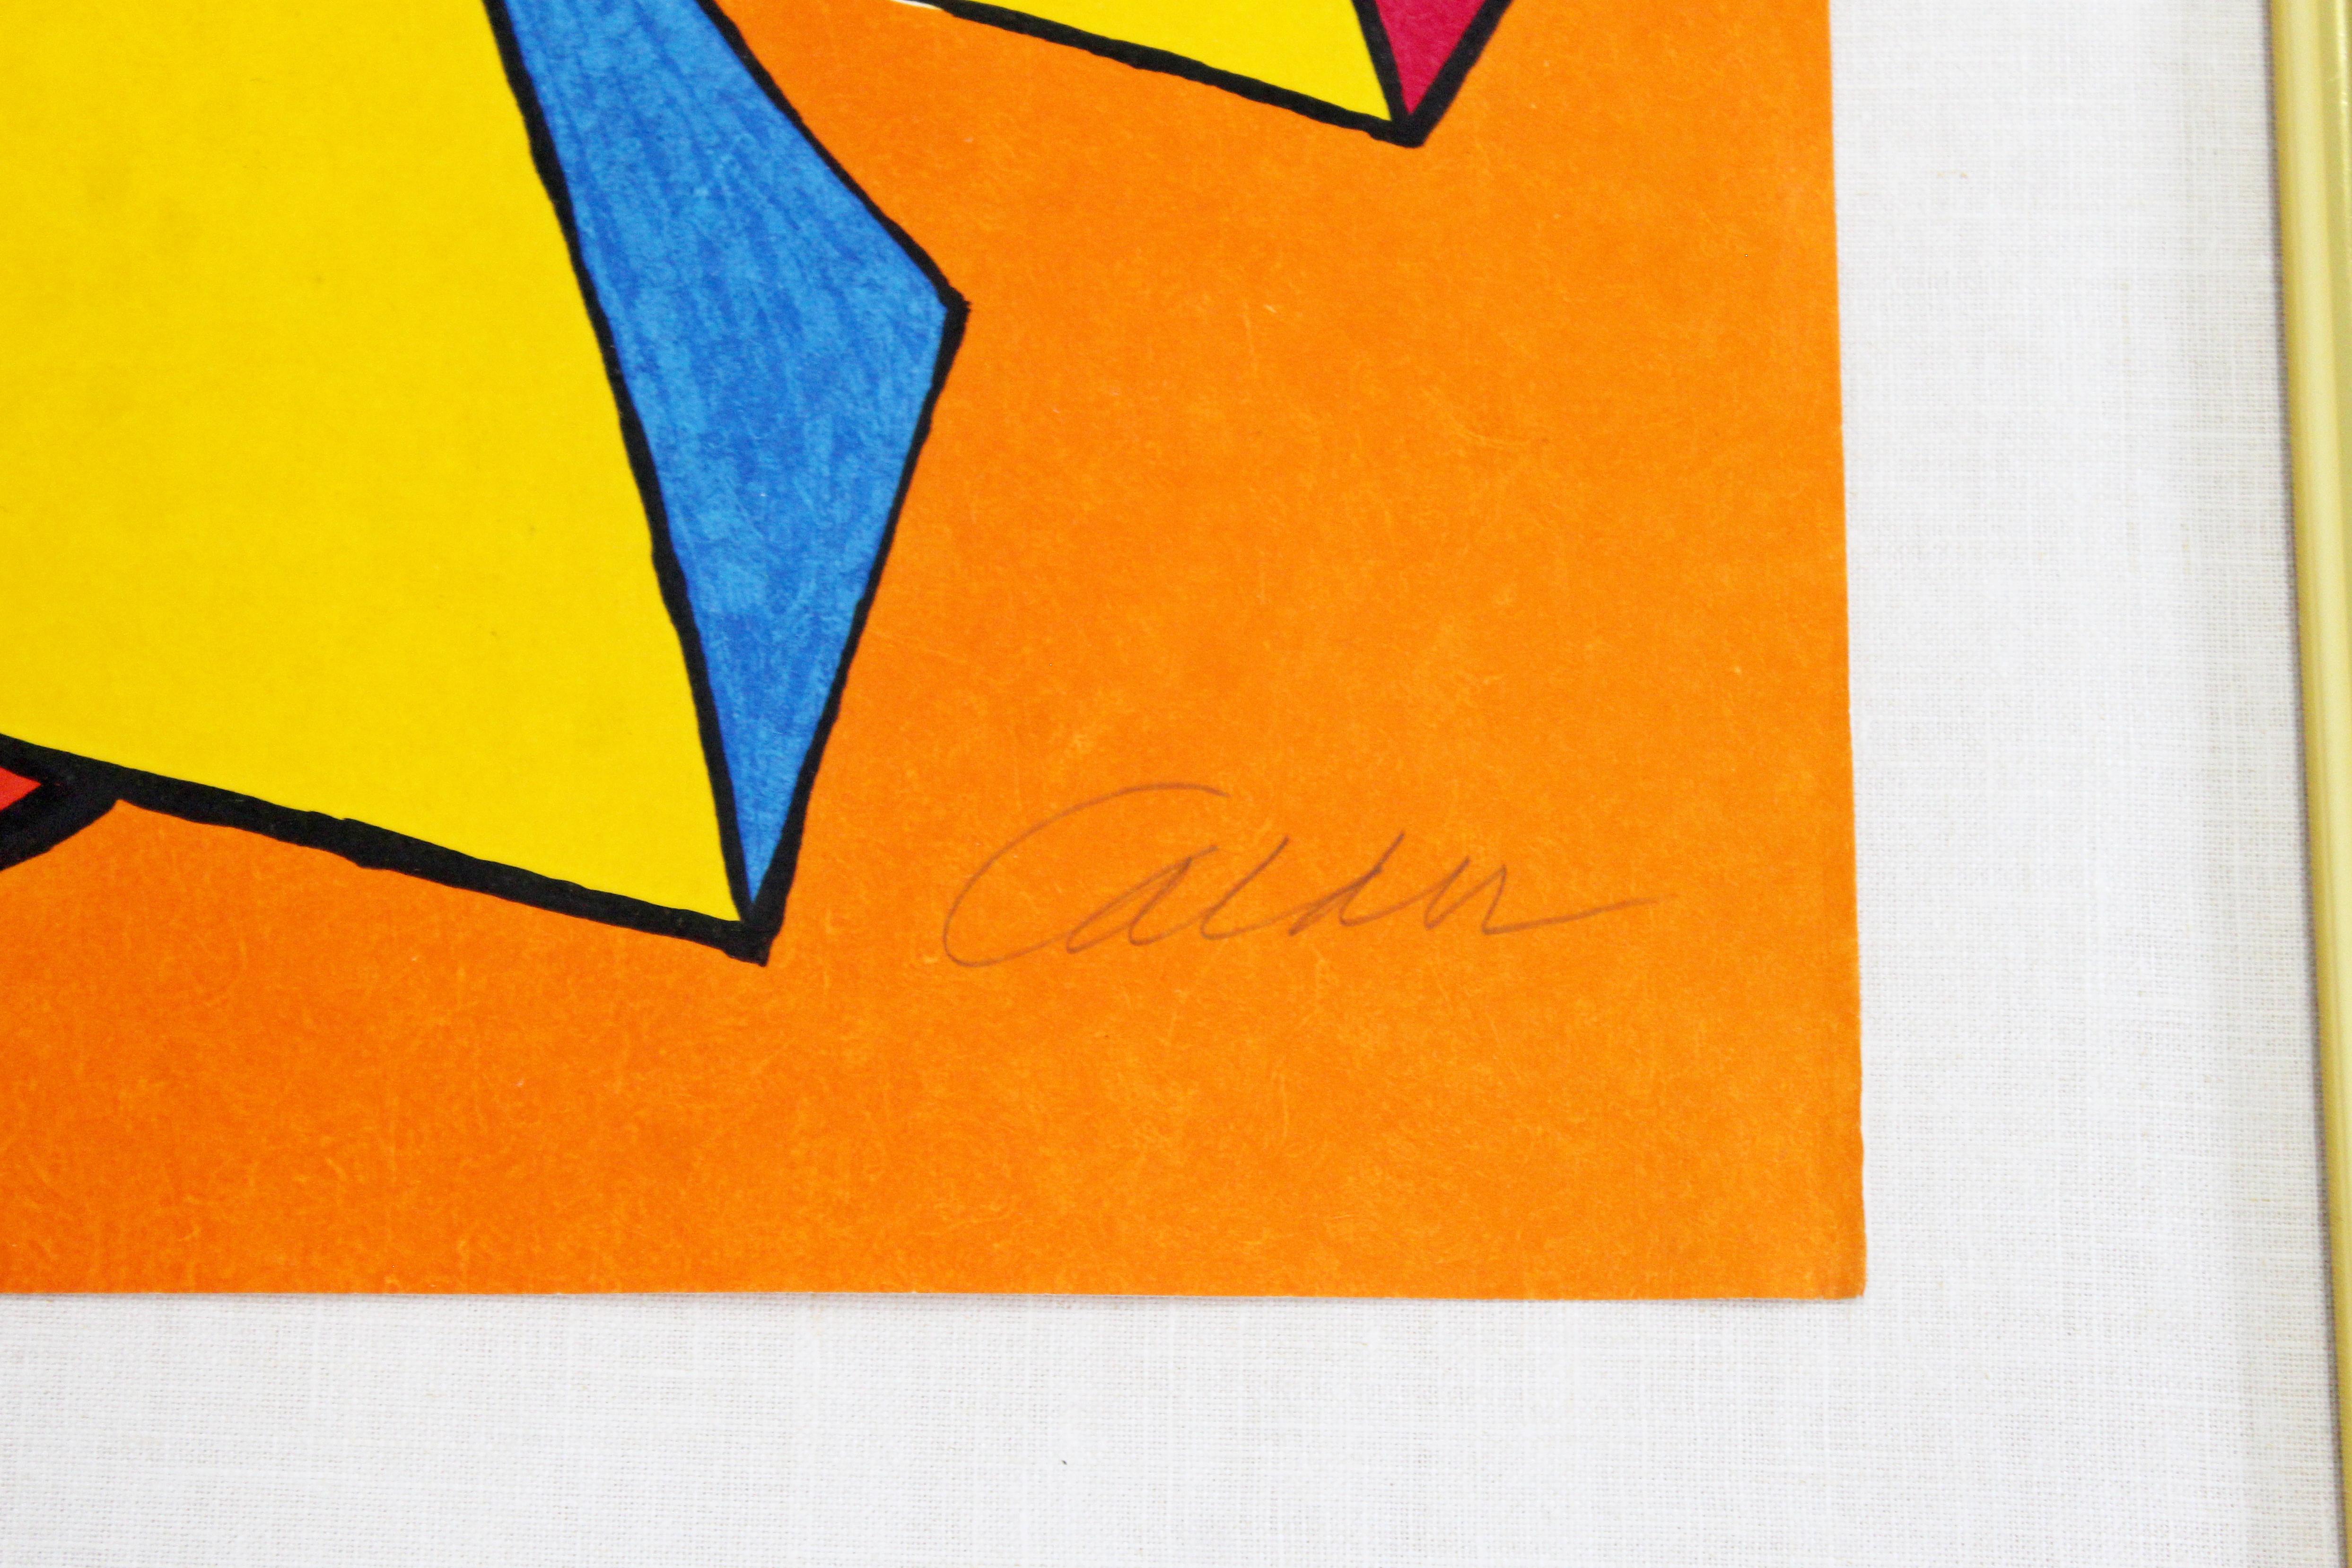 20th Century Mid-Century Modern Framed Signed Calder Pyramid Lithograph Orange Red Shapes